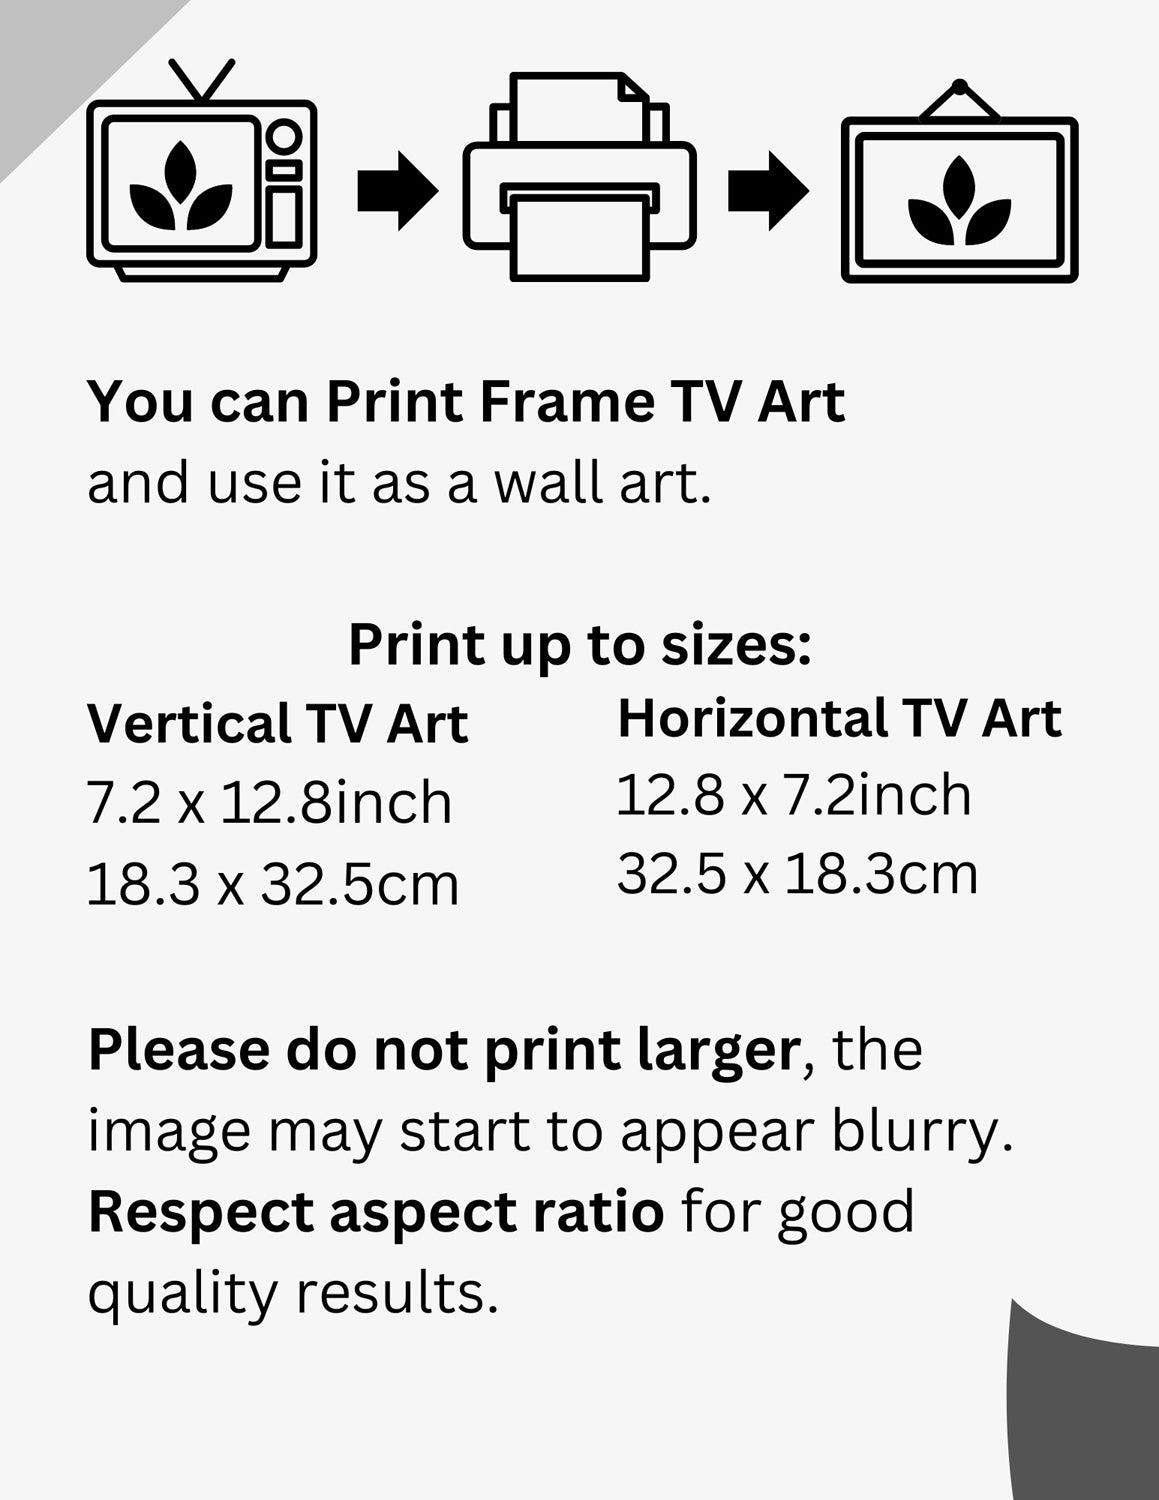 How to print Frame TV art and use it as a wall art. Instruction.